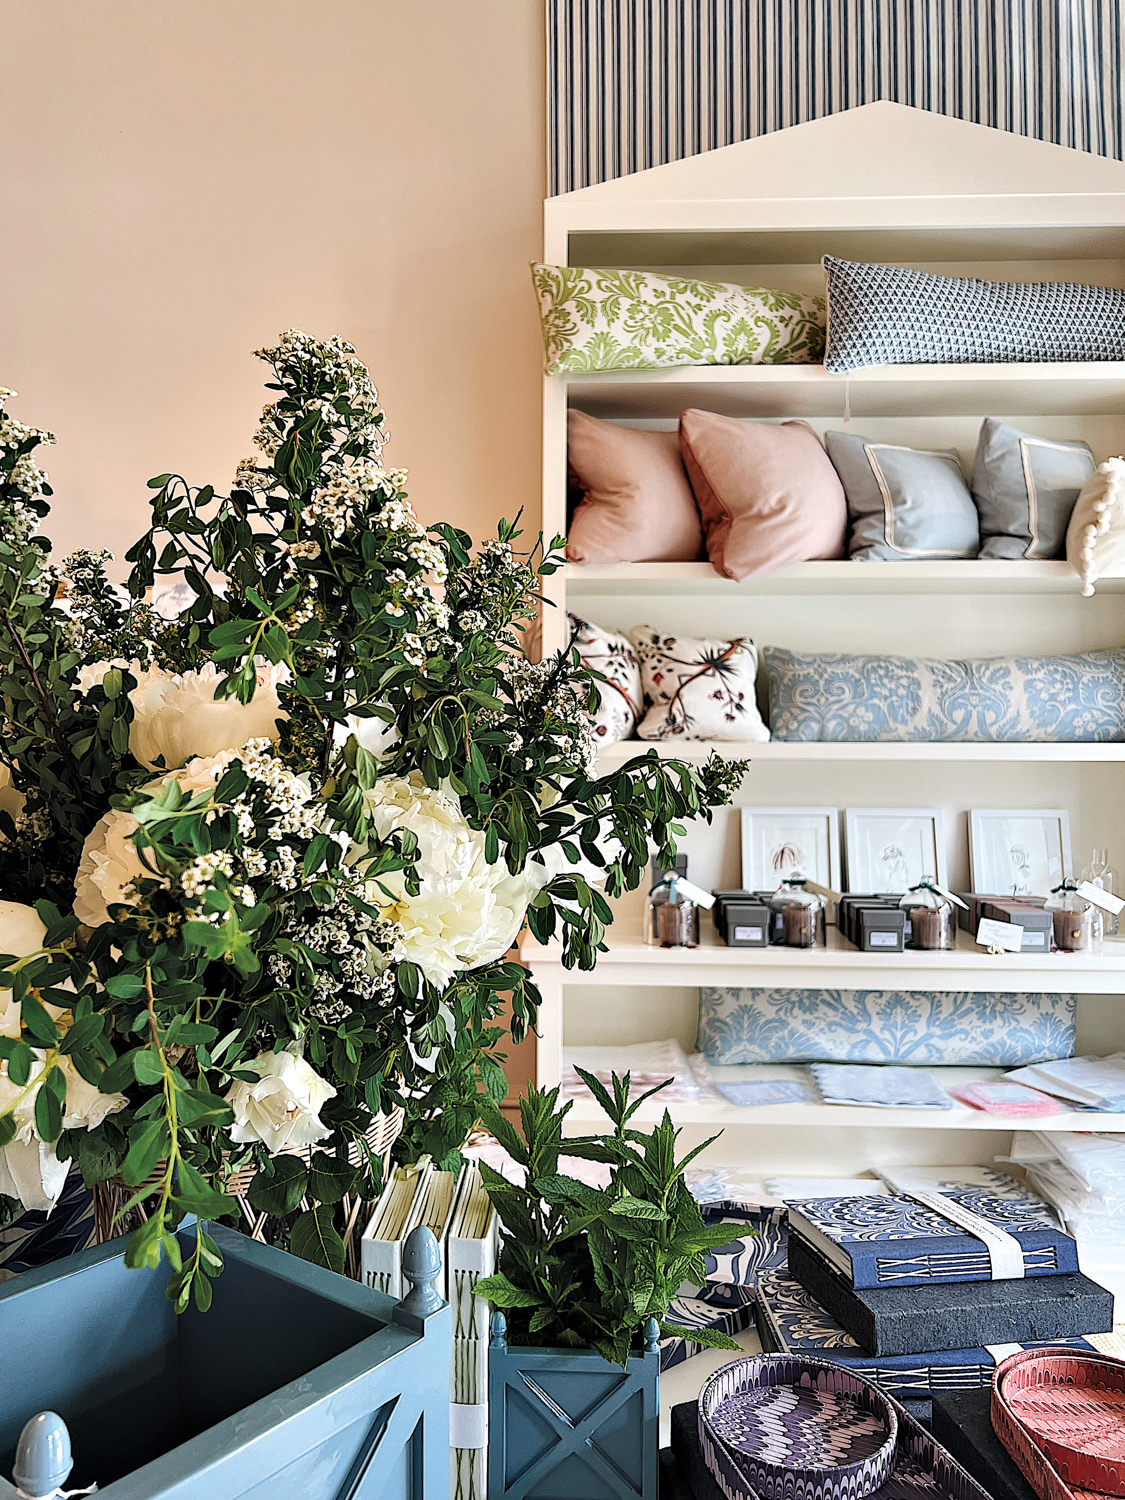 Home decor shop by Josephine Fisher Freckmann with a white shelf full of decorative pillows